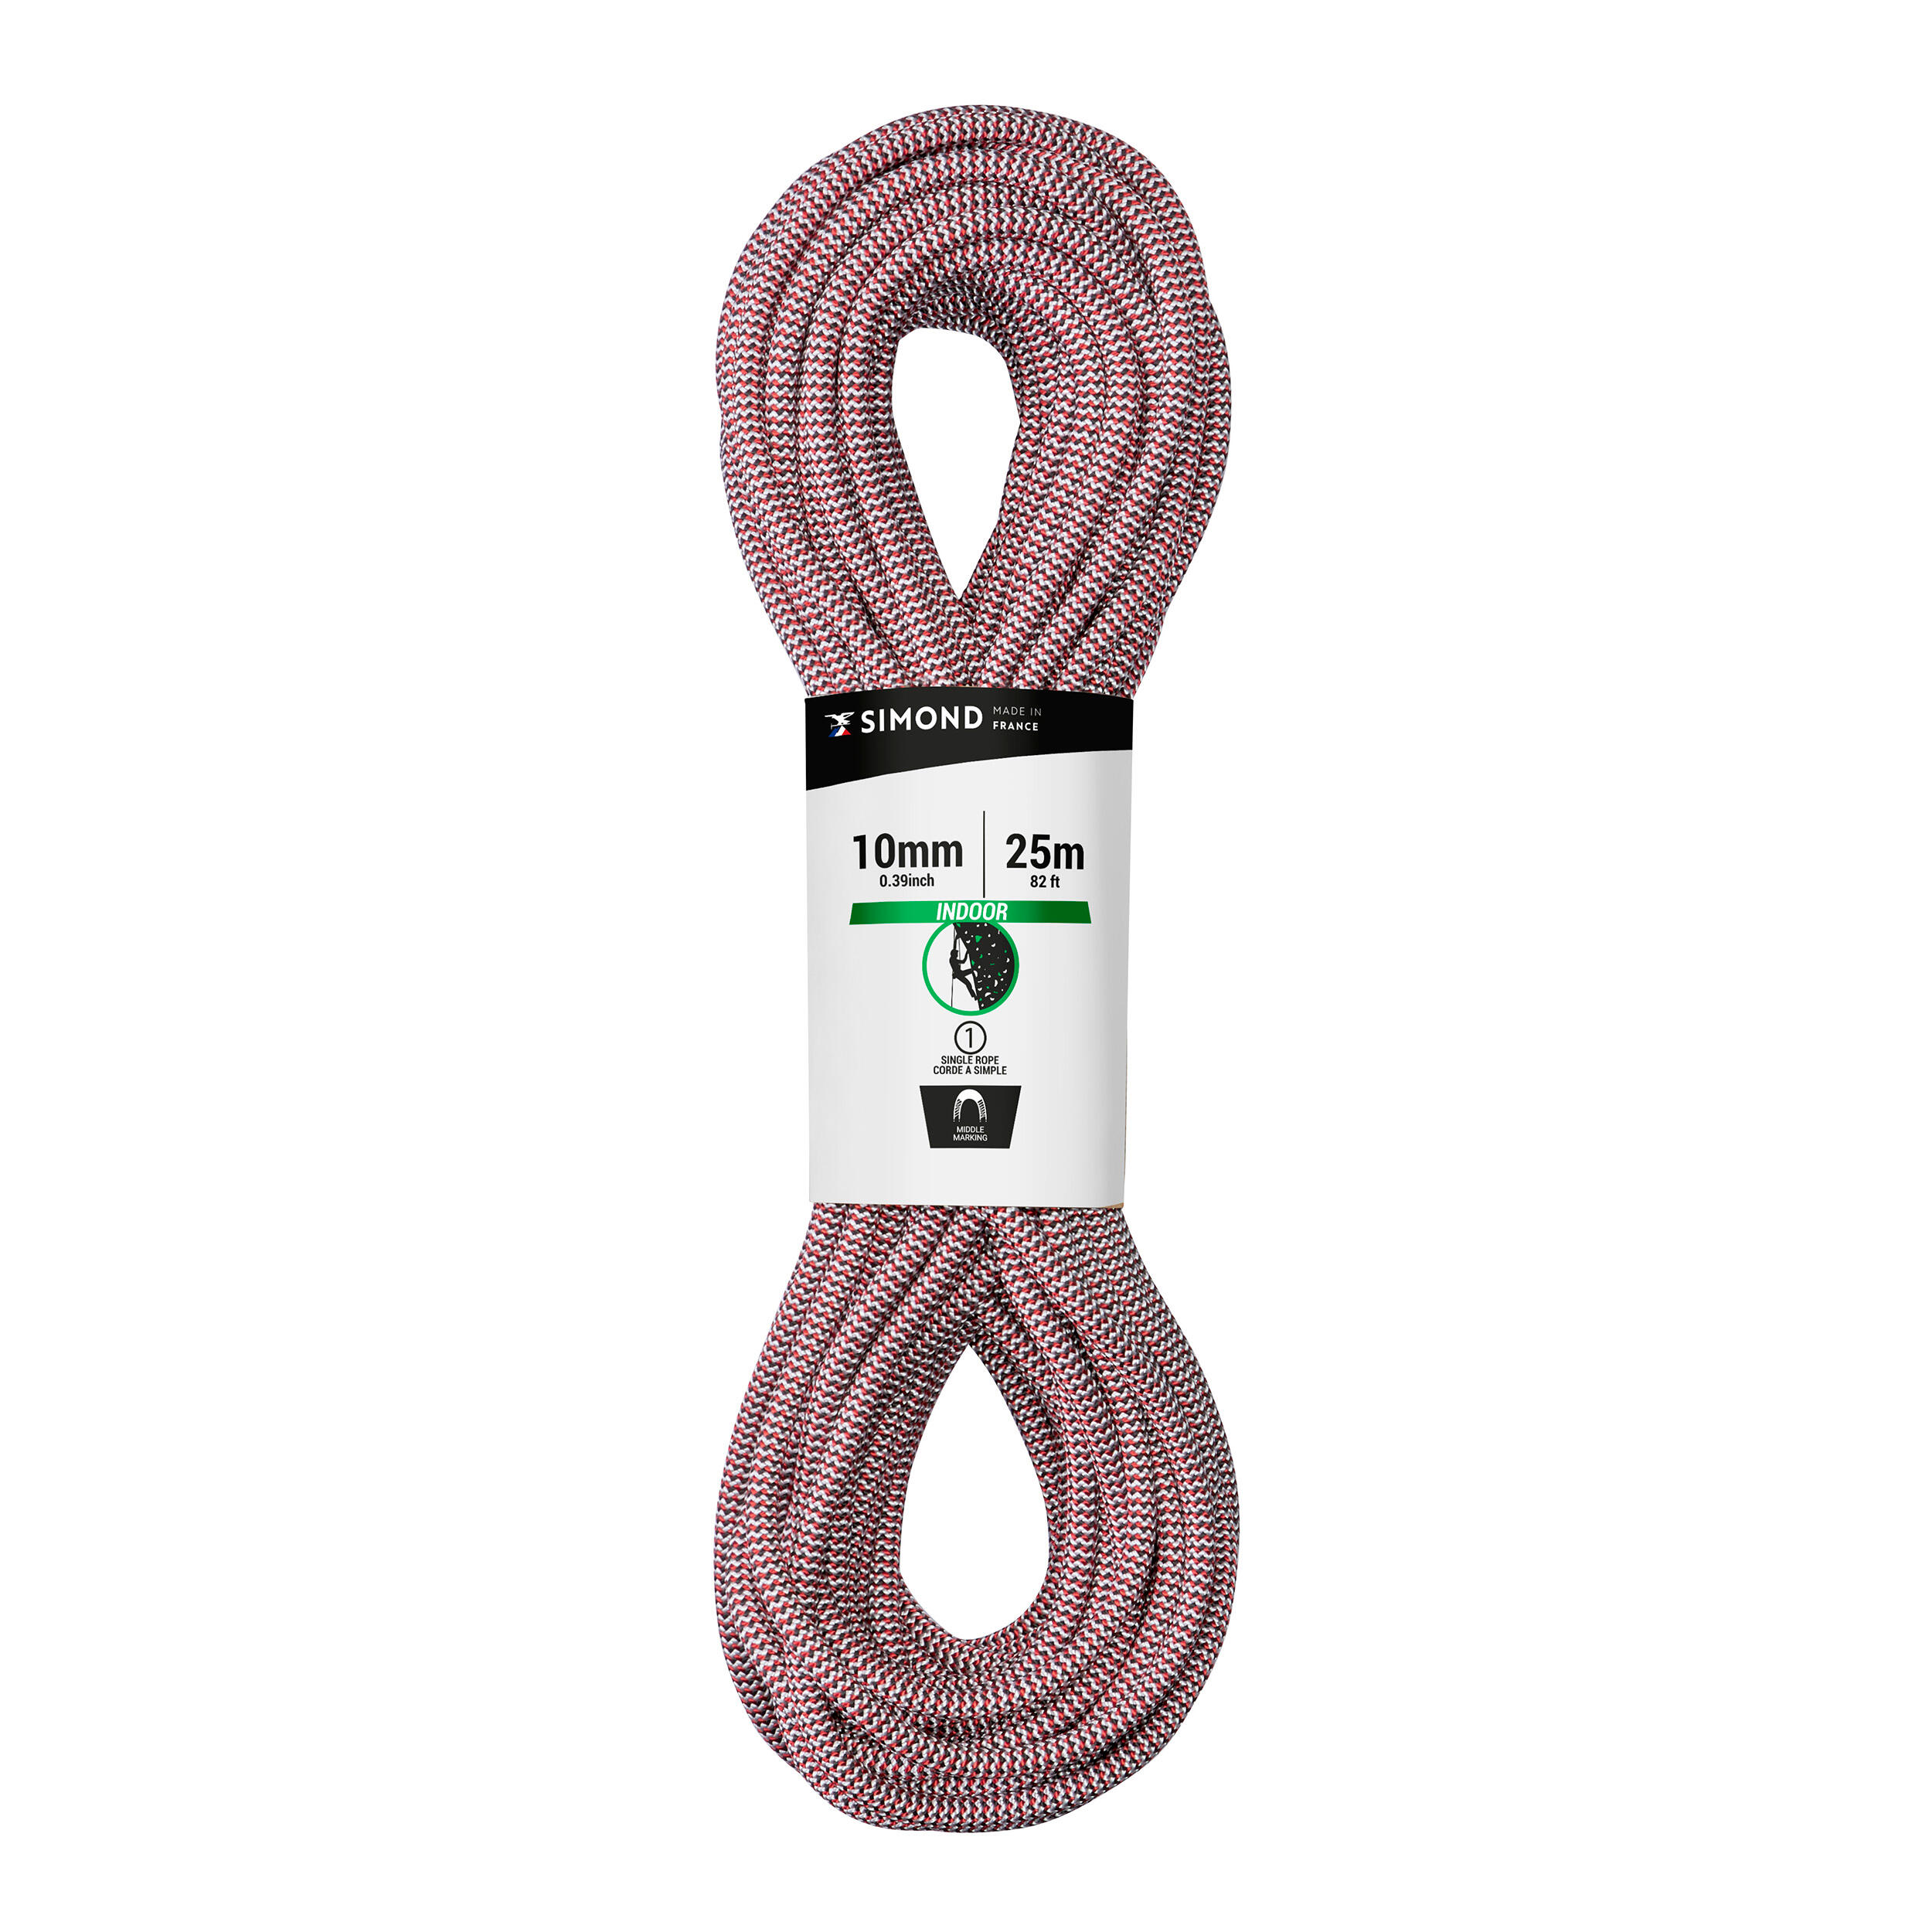 INDOOR CLIMBING ROPE 10 MM x 25 M - COLOUR RED SIMOND